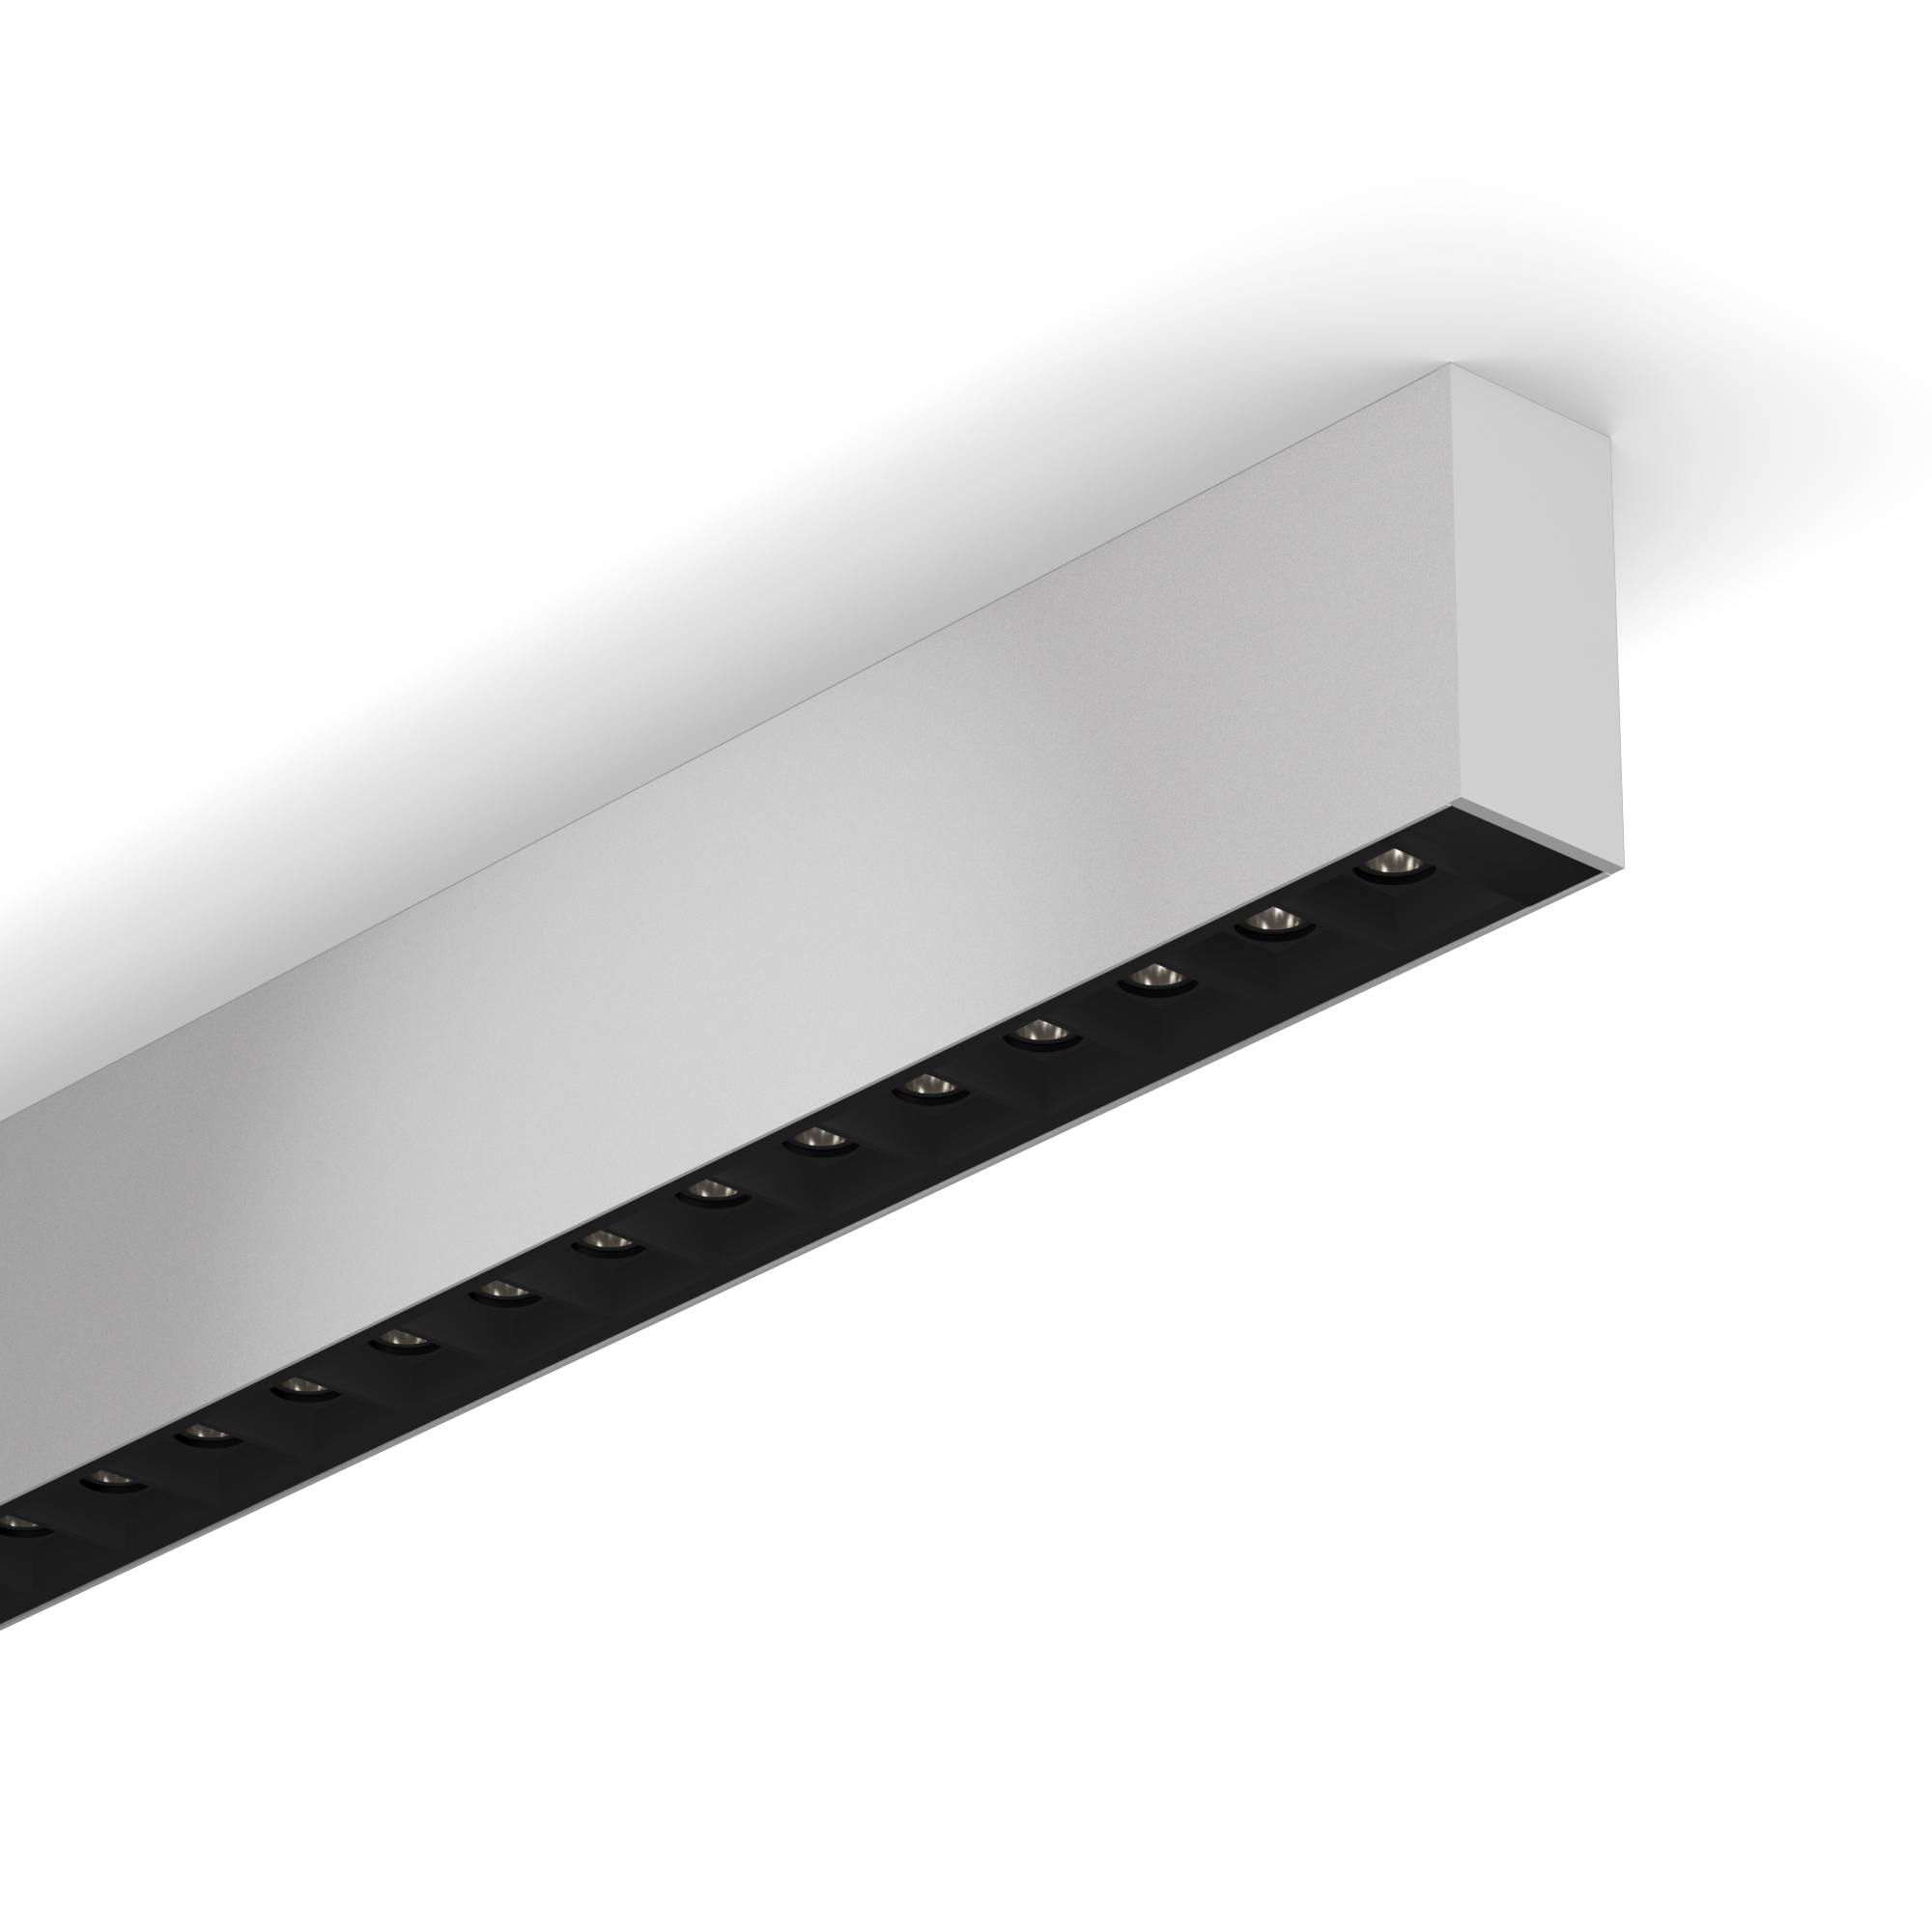 Surface mounted linear with integral on-board driver
MICROBeam MCO Surface is a 1.4” x 2.95” sized linear for surface mounting, typically to a drywall ceiling. MICROBeam MCO Surface includes an integral, field serviceable, on-board driver. MICROBeam MCO Surface brings SmartBeam® capabilities up to a powerful 2000 lumens per foot combined direct and indirect. It’s small size designed to compliment architectural space. MICROBeam MCO Surface is fully field serviceable and can be supplied in continuous runs and a variety of visually appealing shapes.
Typical Applications

 	Offices and co-working spaces
 	Schools, colleges and universities
 	Retail spaces